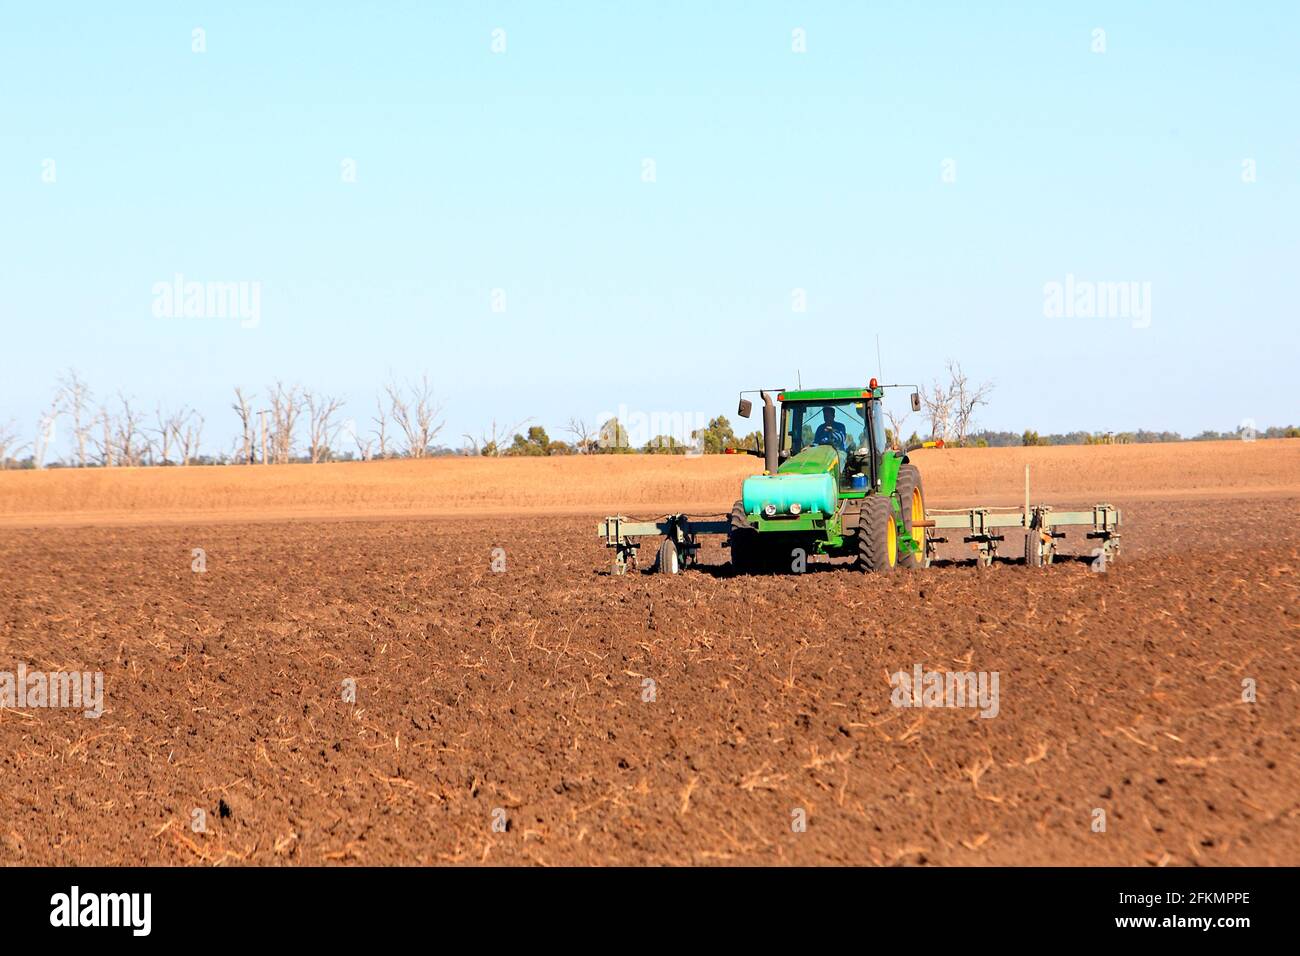 John Deere 8120 tractor plowing a field near Narrabri, NSW, Australia. There is a liquid fertiliser tank on the front of the tractor. Stock Photo